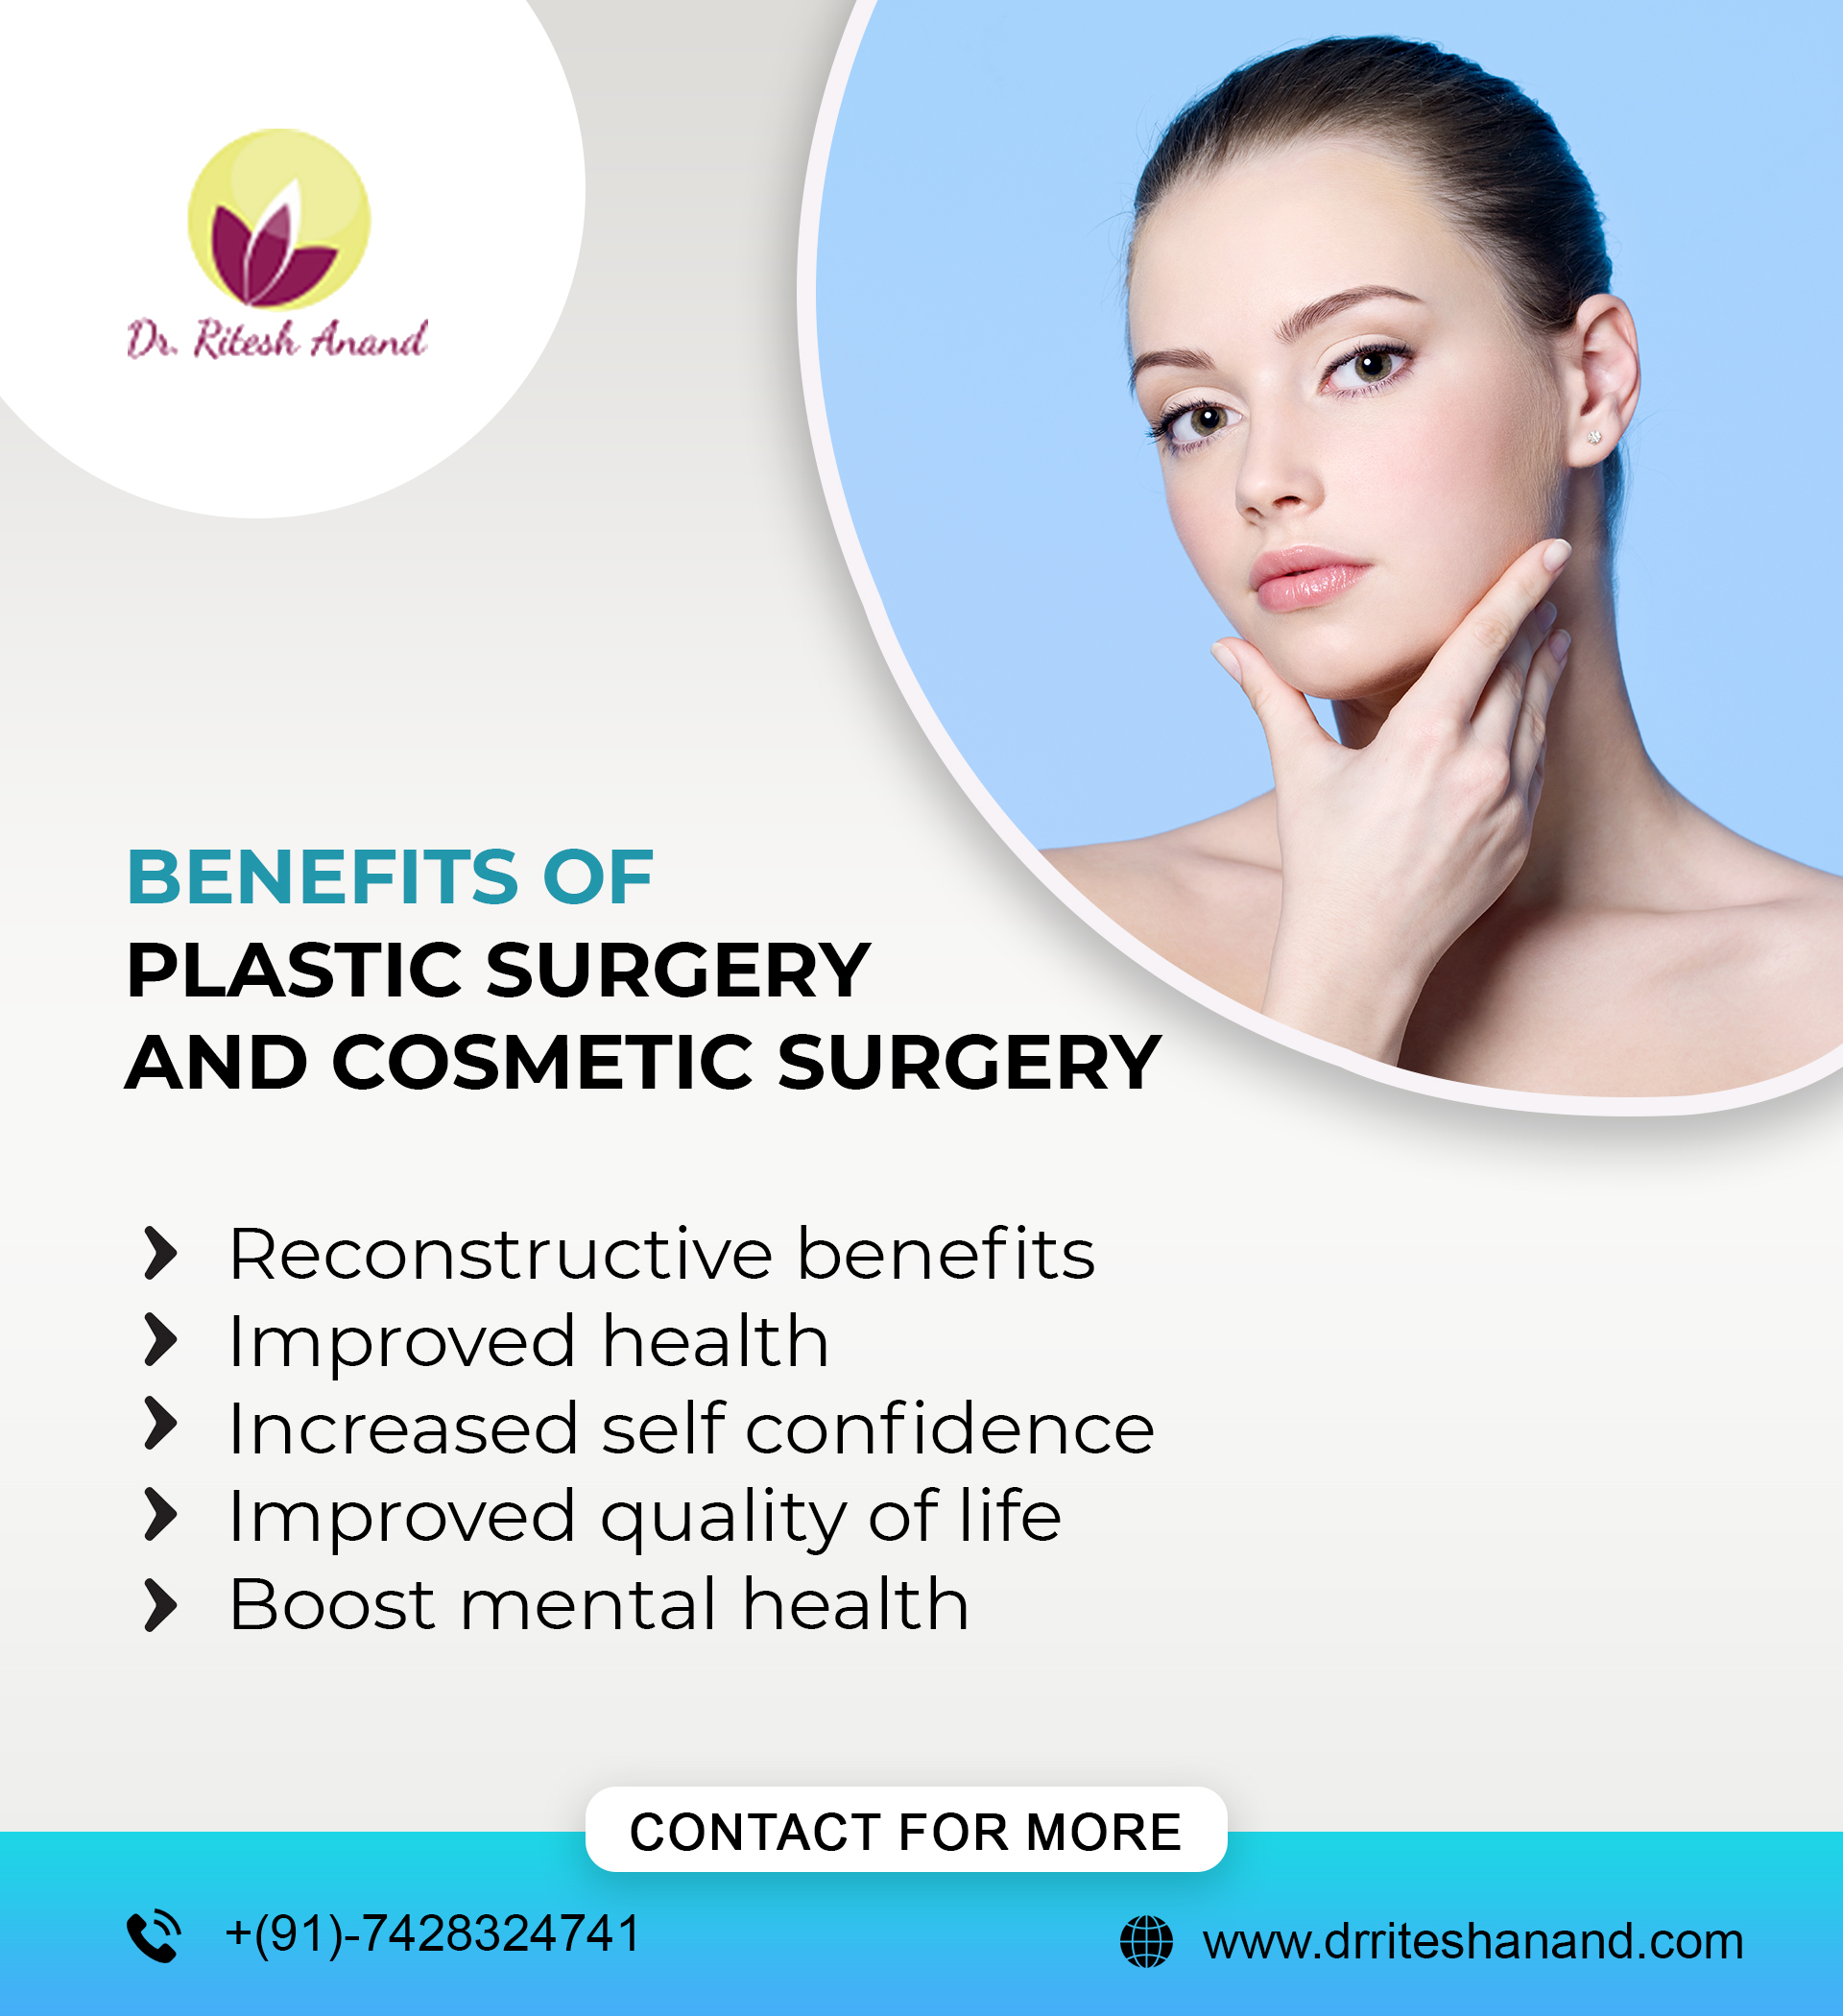 Benefits of Plastic Surgery and Cosmetic Surgery